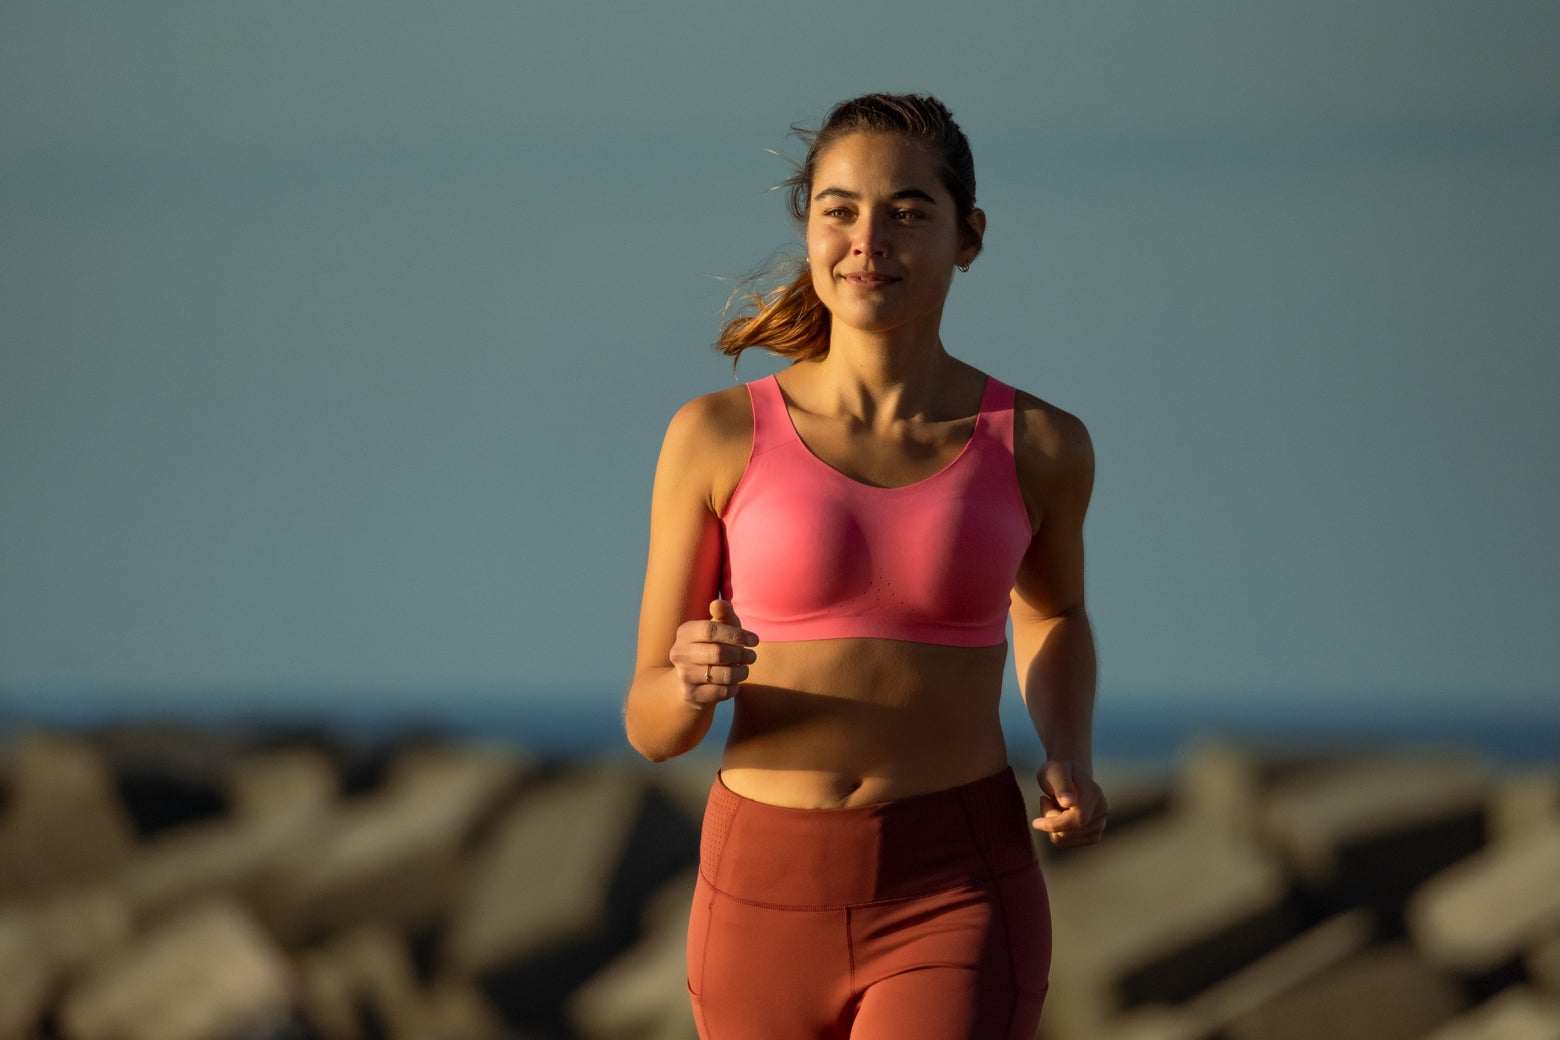 Wearing the right sports bra can increase women's exercise output by 7%